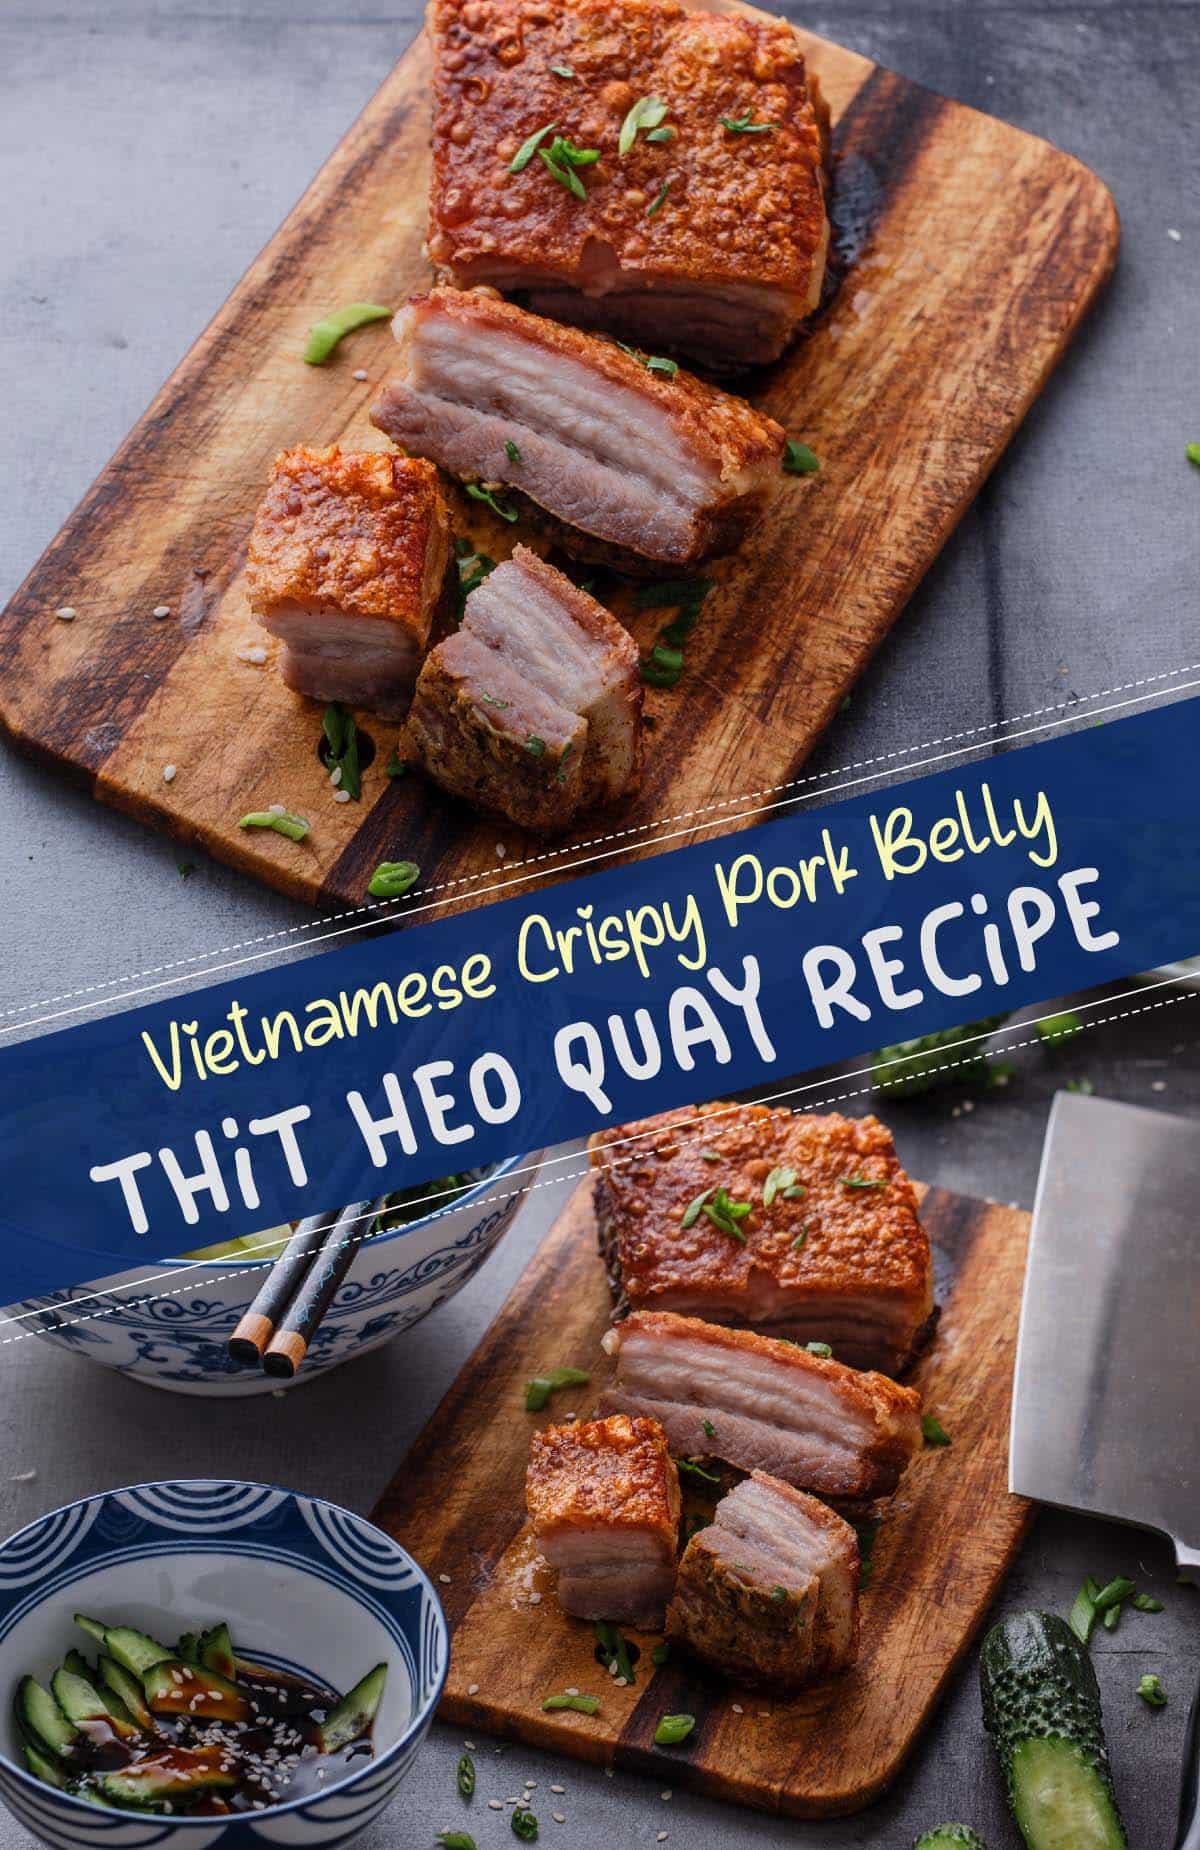 This Thit Heo Quay recipe is about capturing Vietnamese cuisine's essence in every bite. The tender pork belly is seasoned just right and baked to perfection, resulting in juicy, flavorful meat.